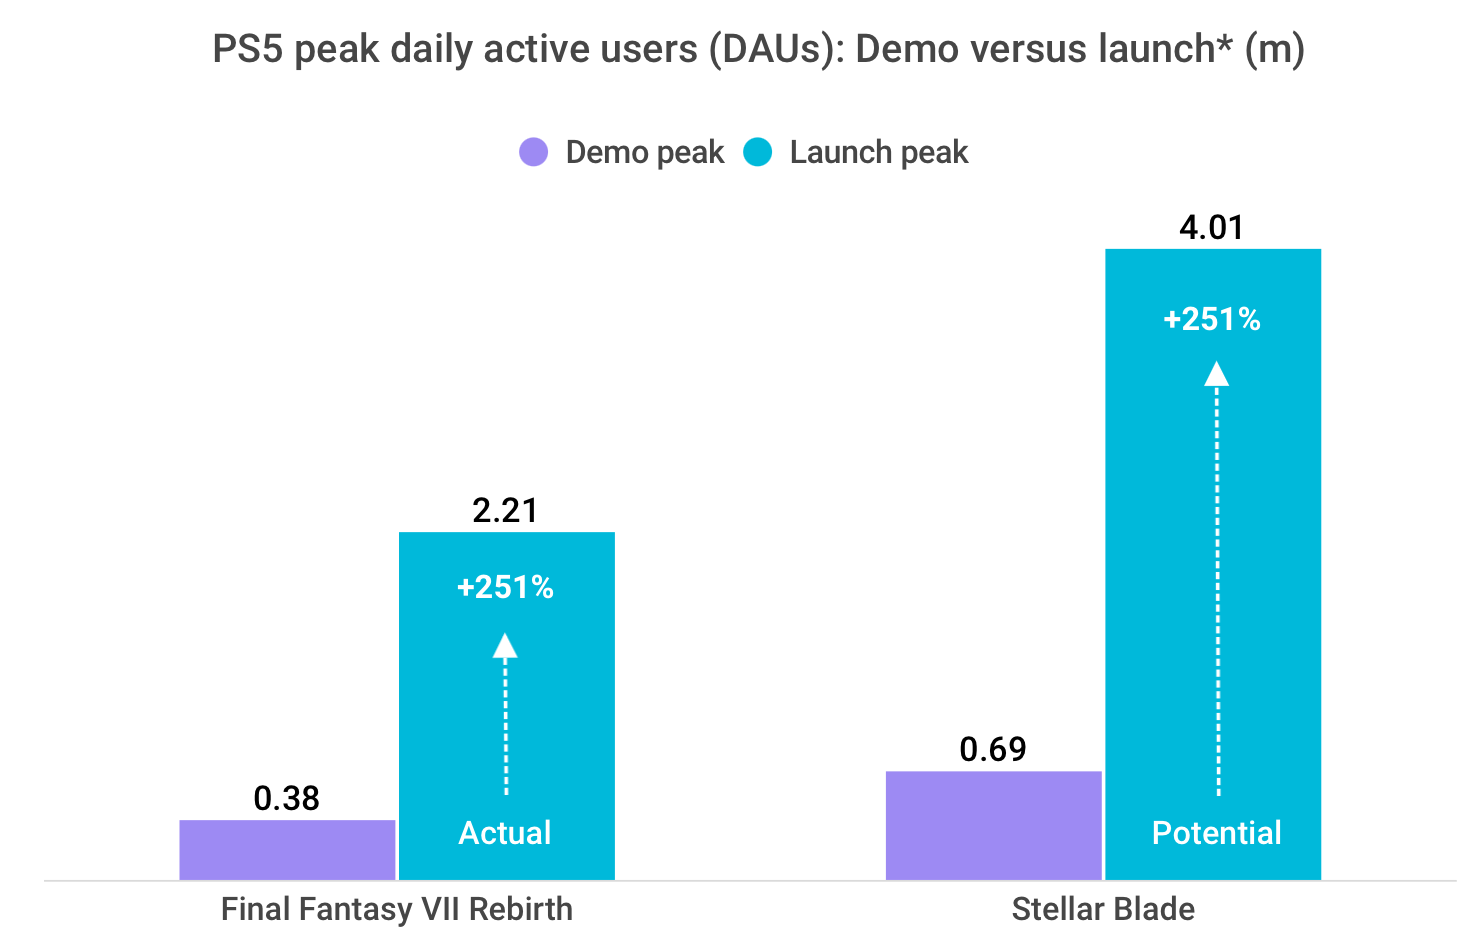 Daily active PS5 users (DAUs): demo versus launch* (million)